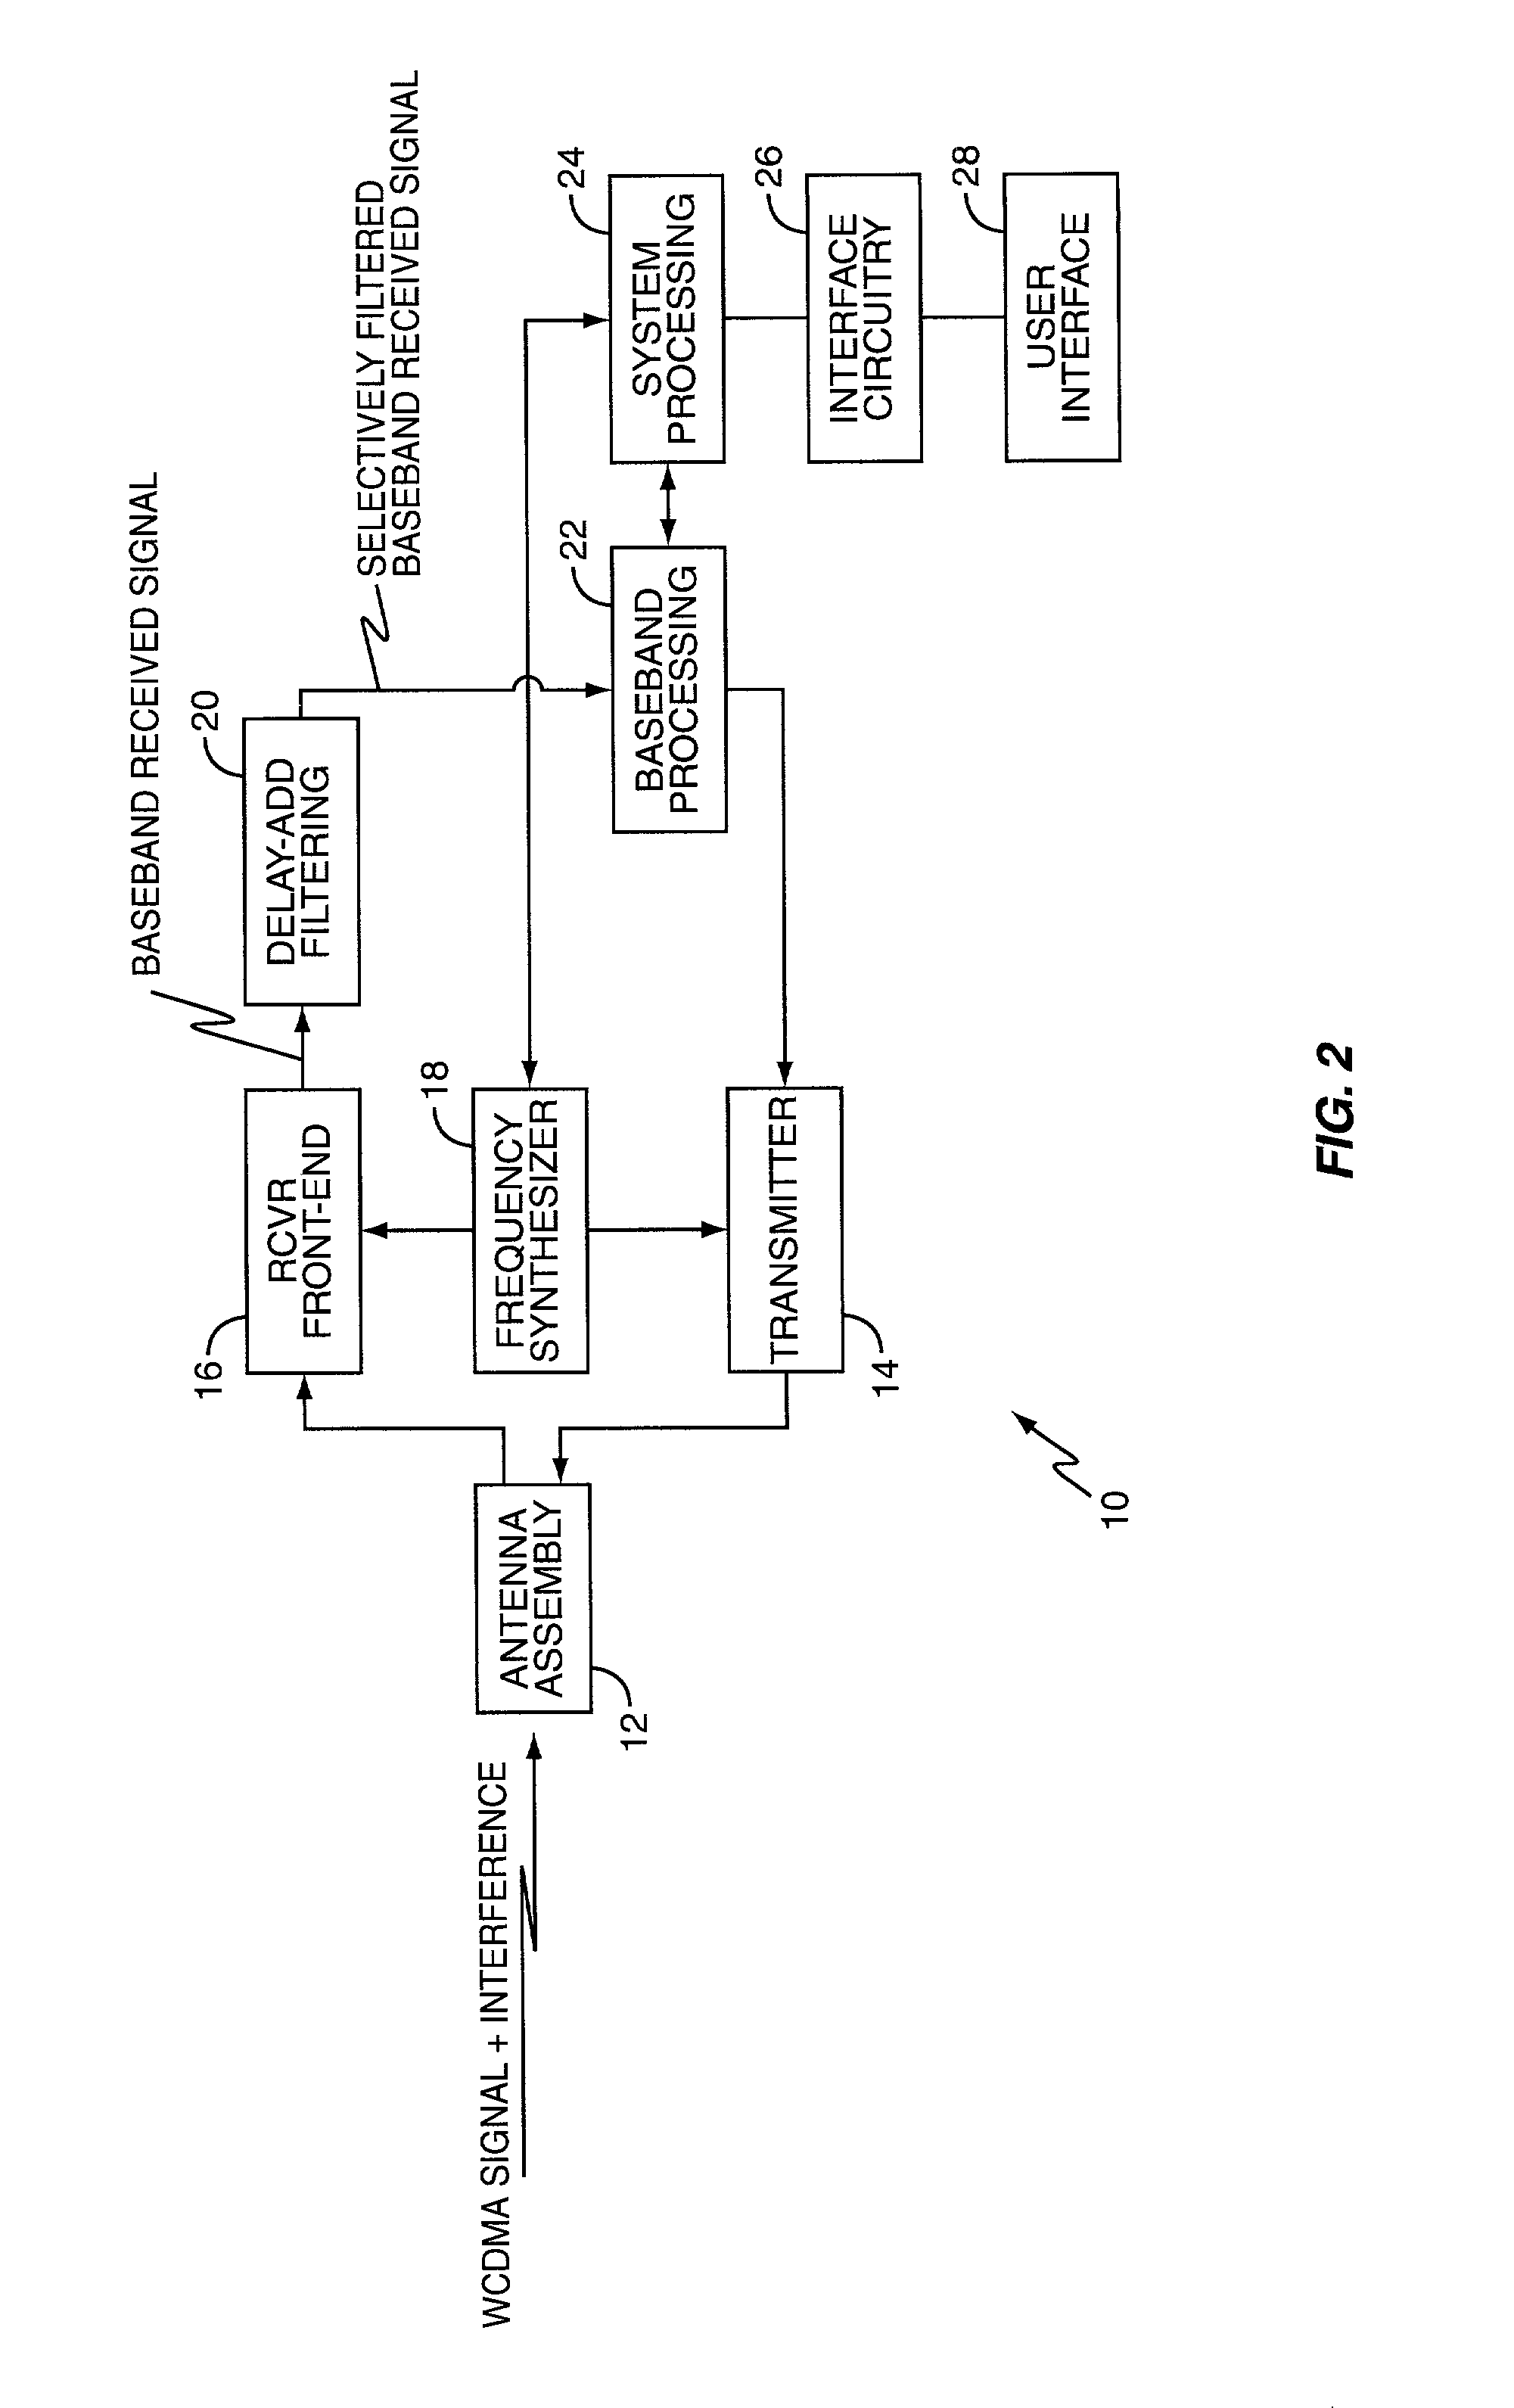 Received signal filtering for enhanced selectivity